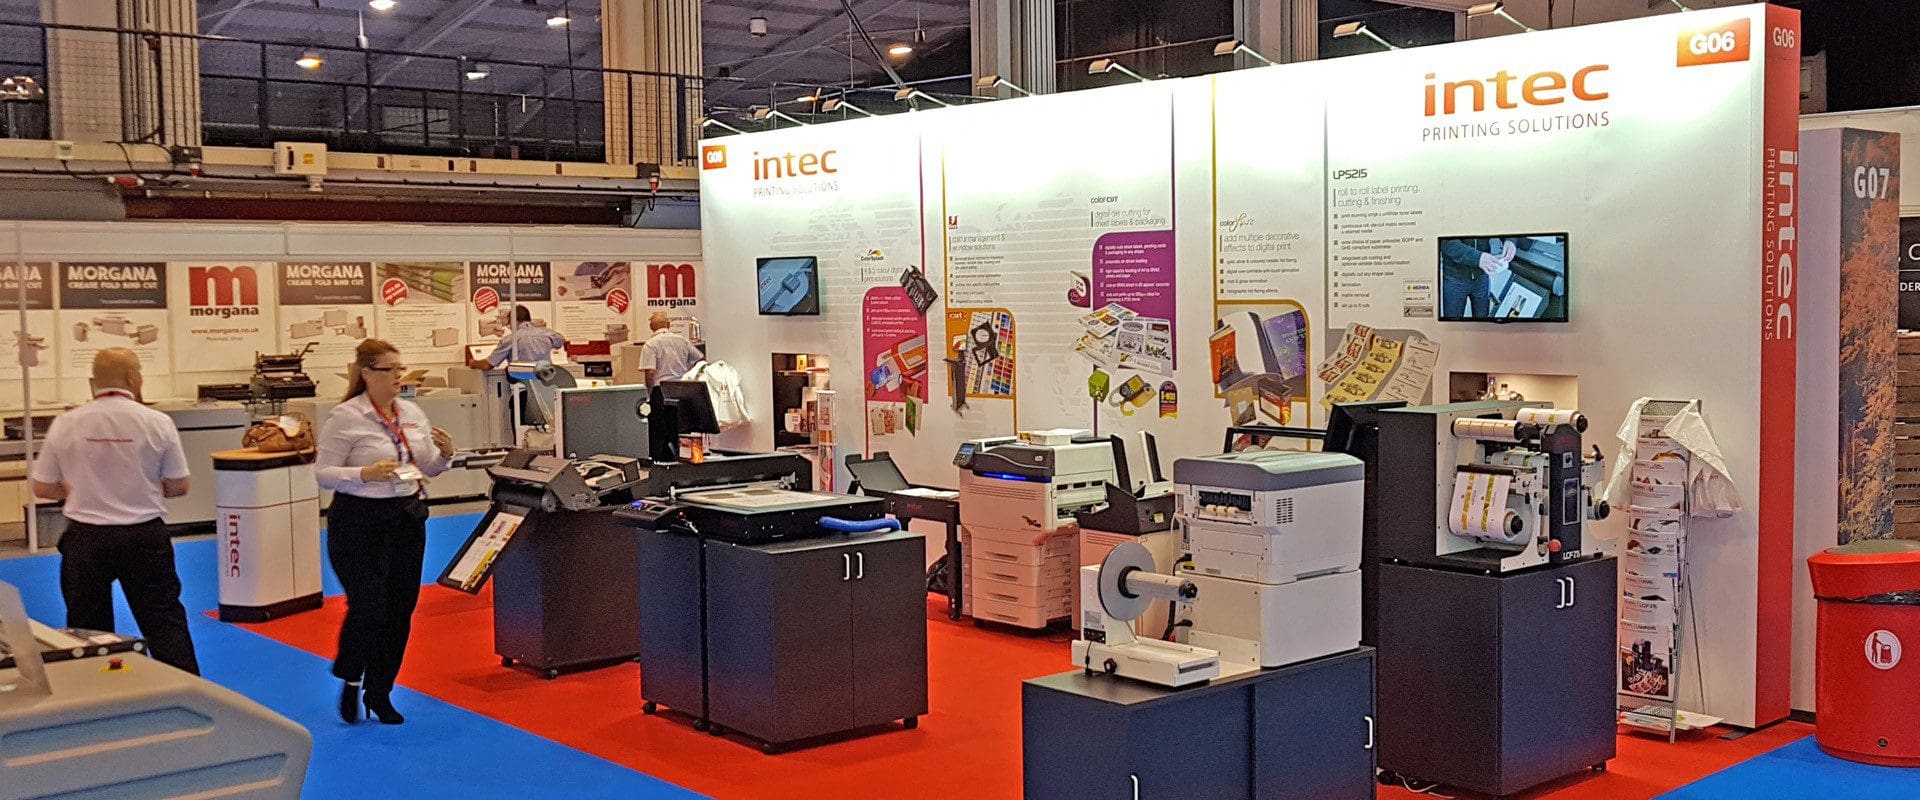 Intec stand at the print show